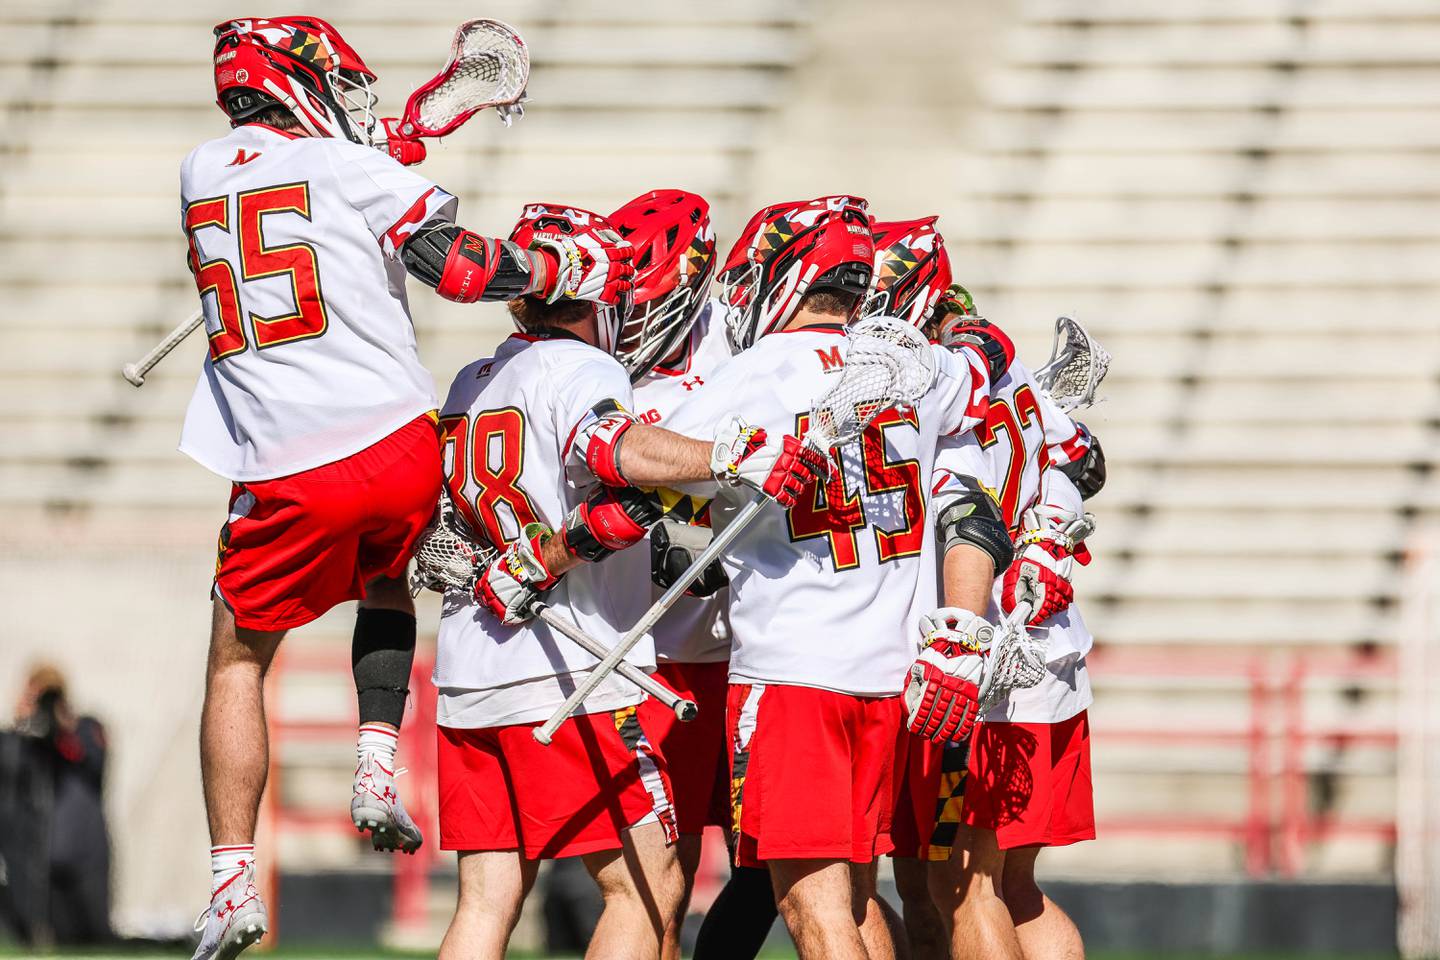 This picture shows several players from the University of Maryland men's lacrosse game gathering after a goal.